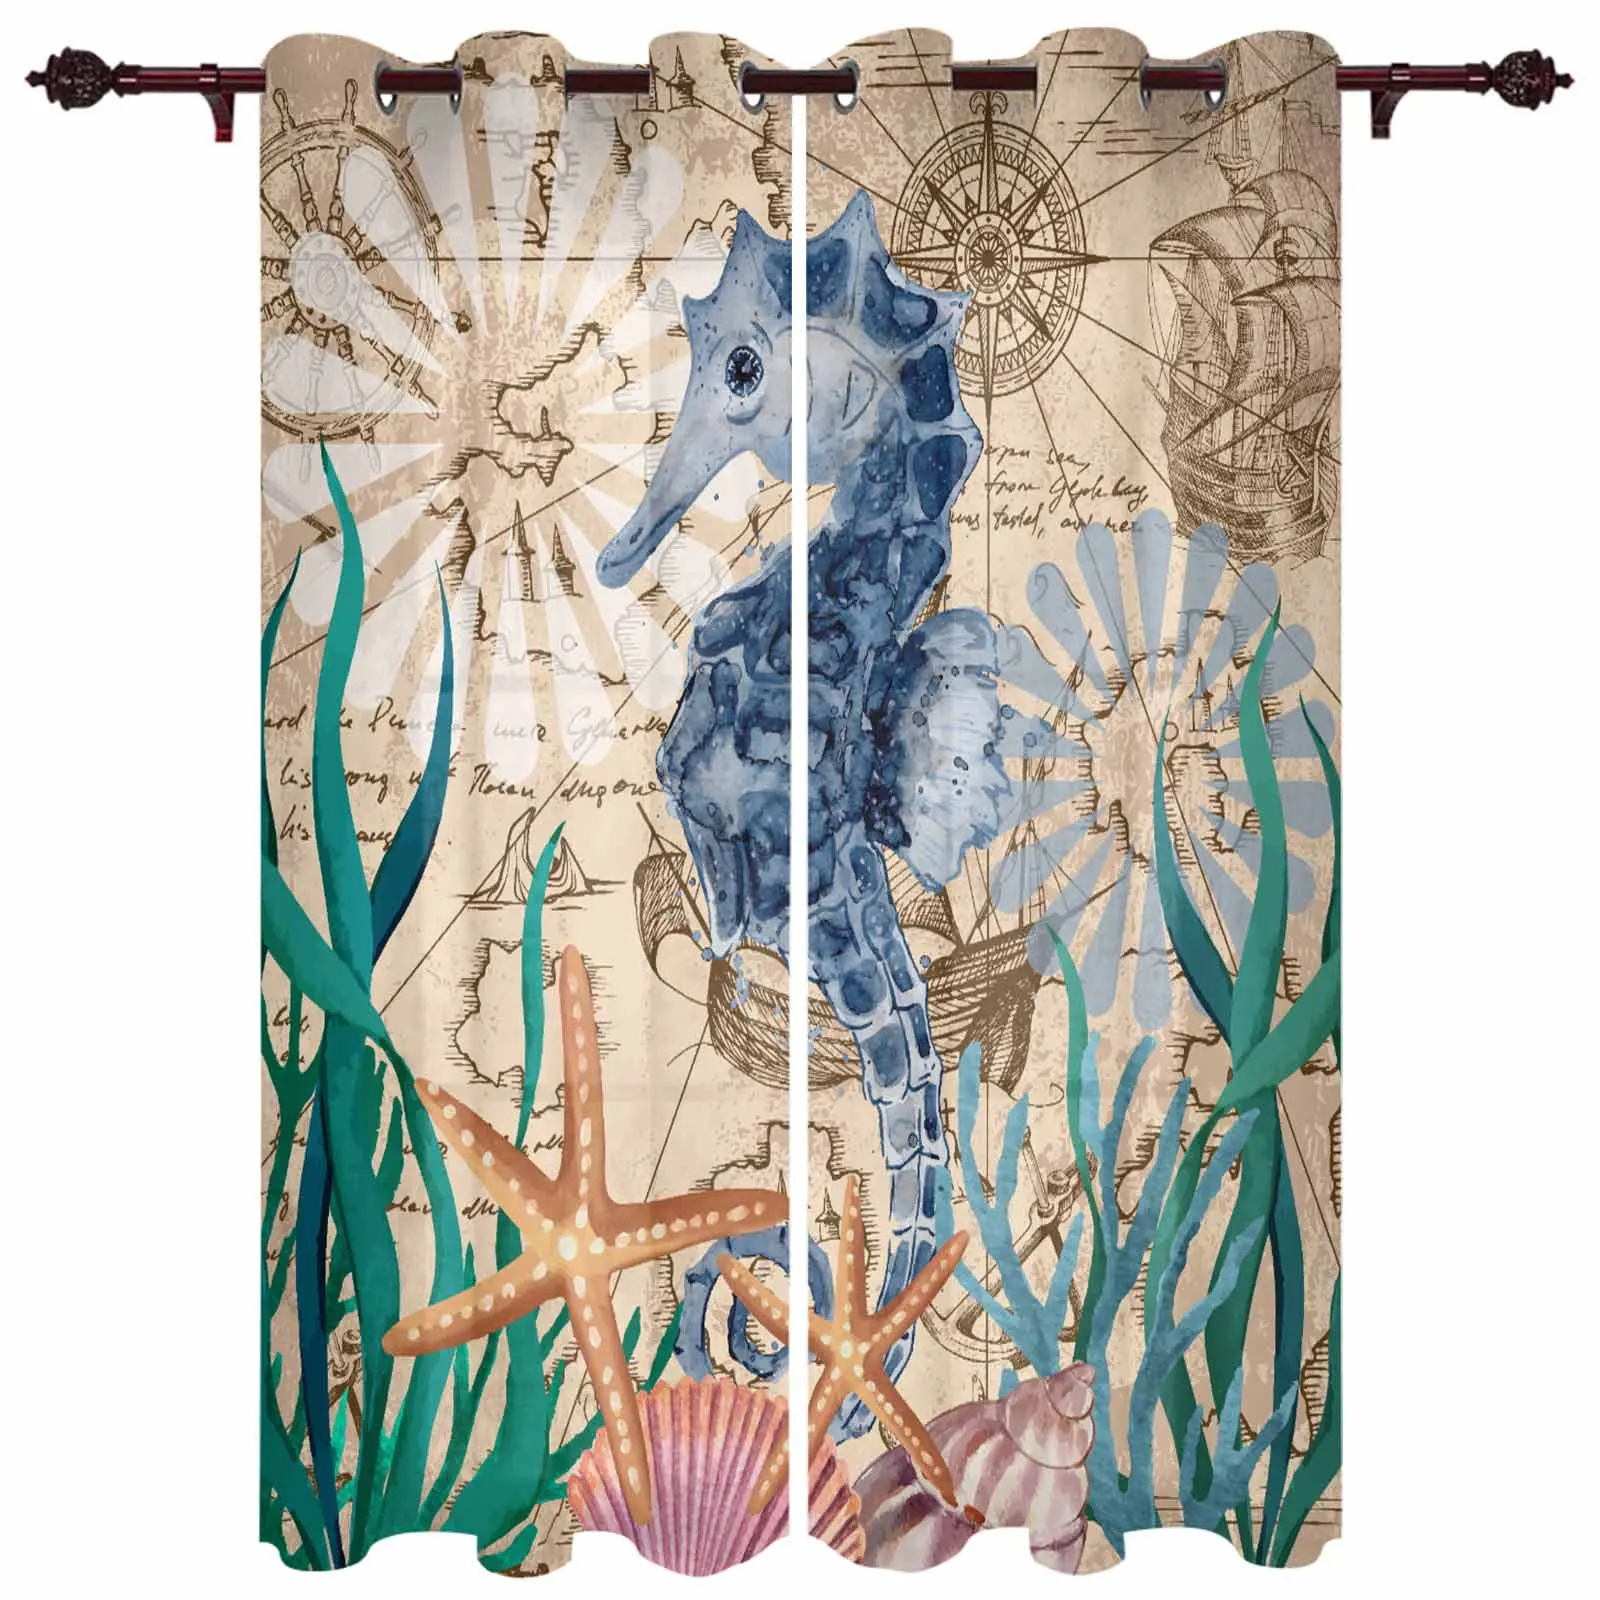 

Seahorse Seaweed Starfish Shell Retro Modern Window Curtains for Living Room Luxury Bedroom Blinds Drapes Kitchen Curtains